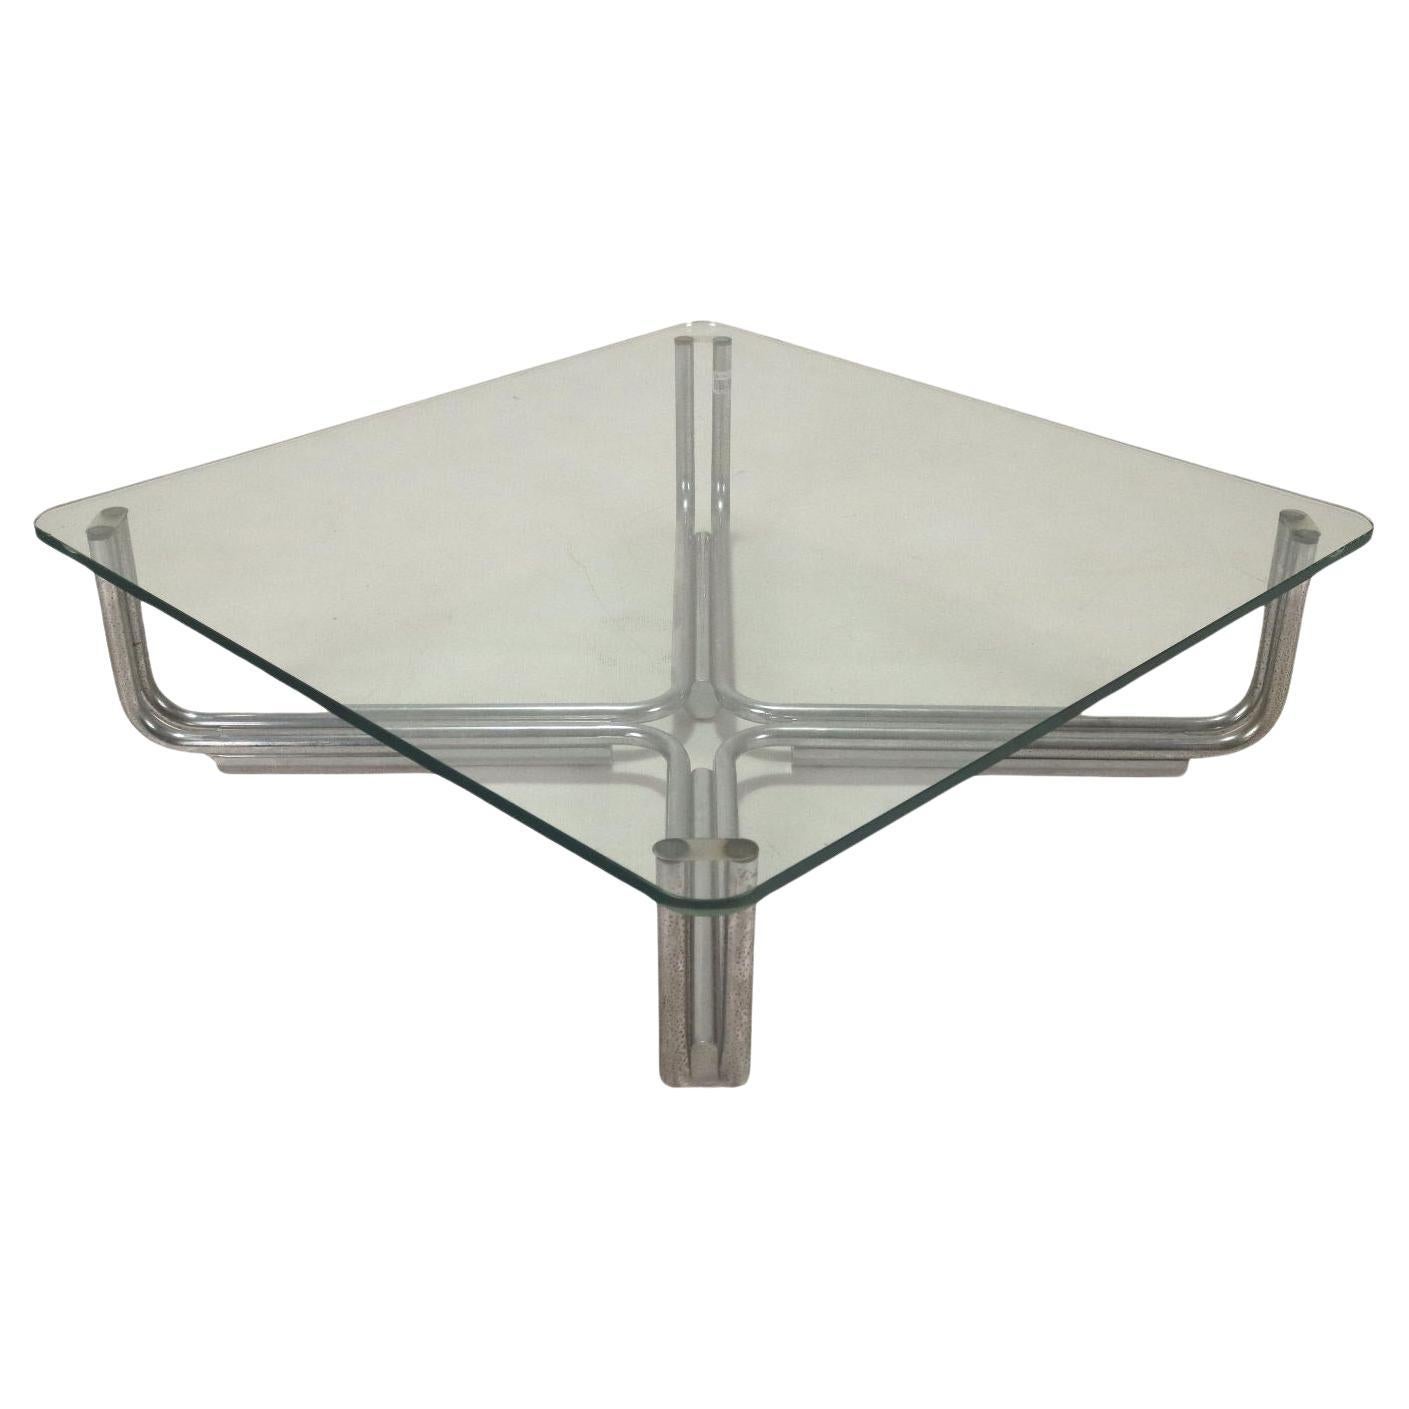 Gianfranco Frattini for Cassina 1970s coffee table in metal and glass